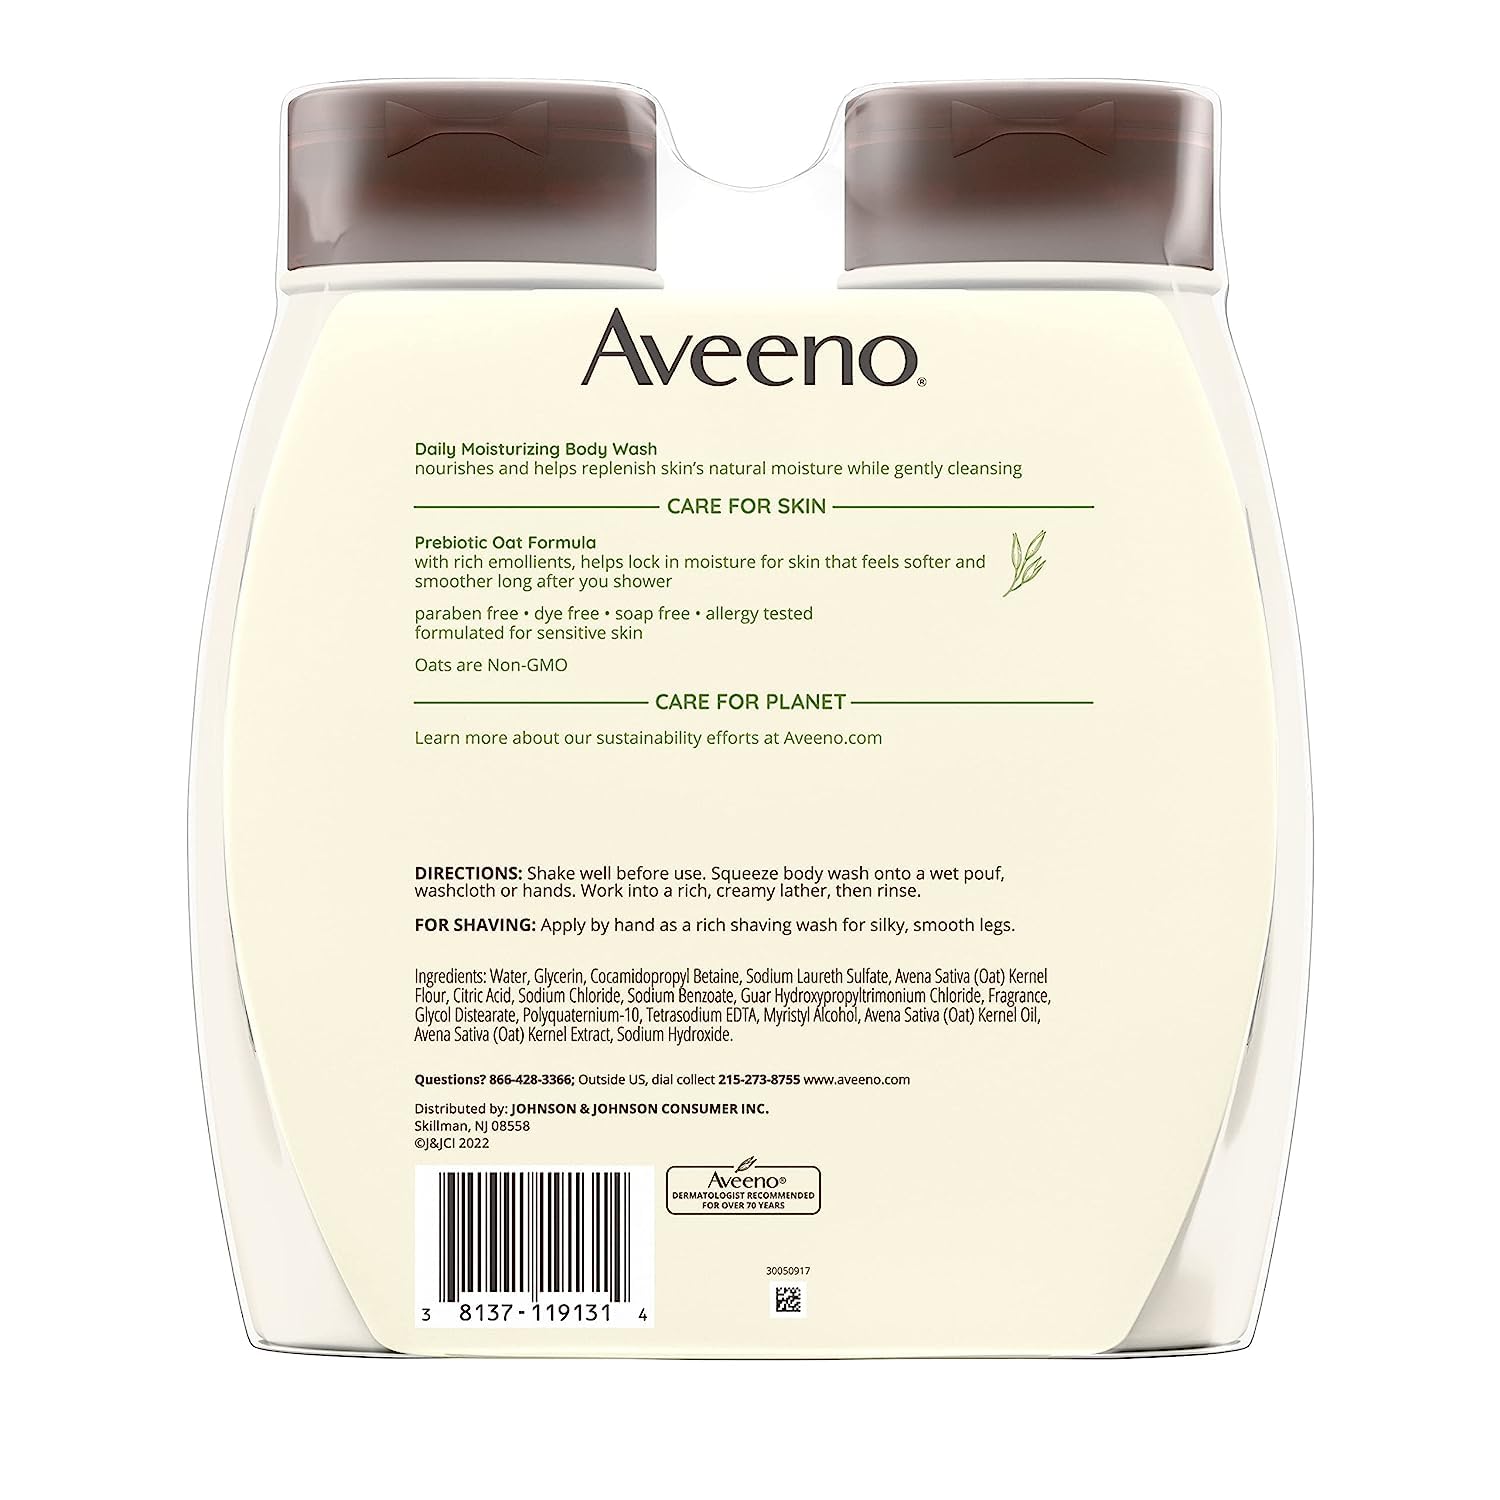 Aveeno Daily Moisturizing Body Wash for Dry & Sensitive Skin with Prebiotic Oat, Hydrating Oat Body Wash Nourishes Dry Skin & Gently Cleanses, Light Fragrance, Sulfate-Free, 18 fl. oz, Pack of 2